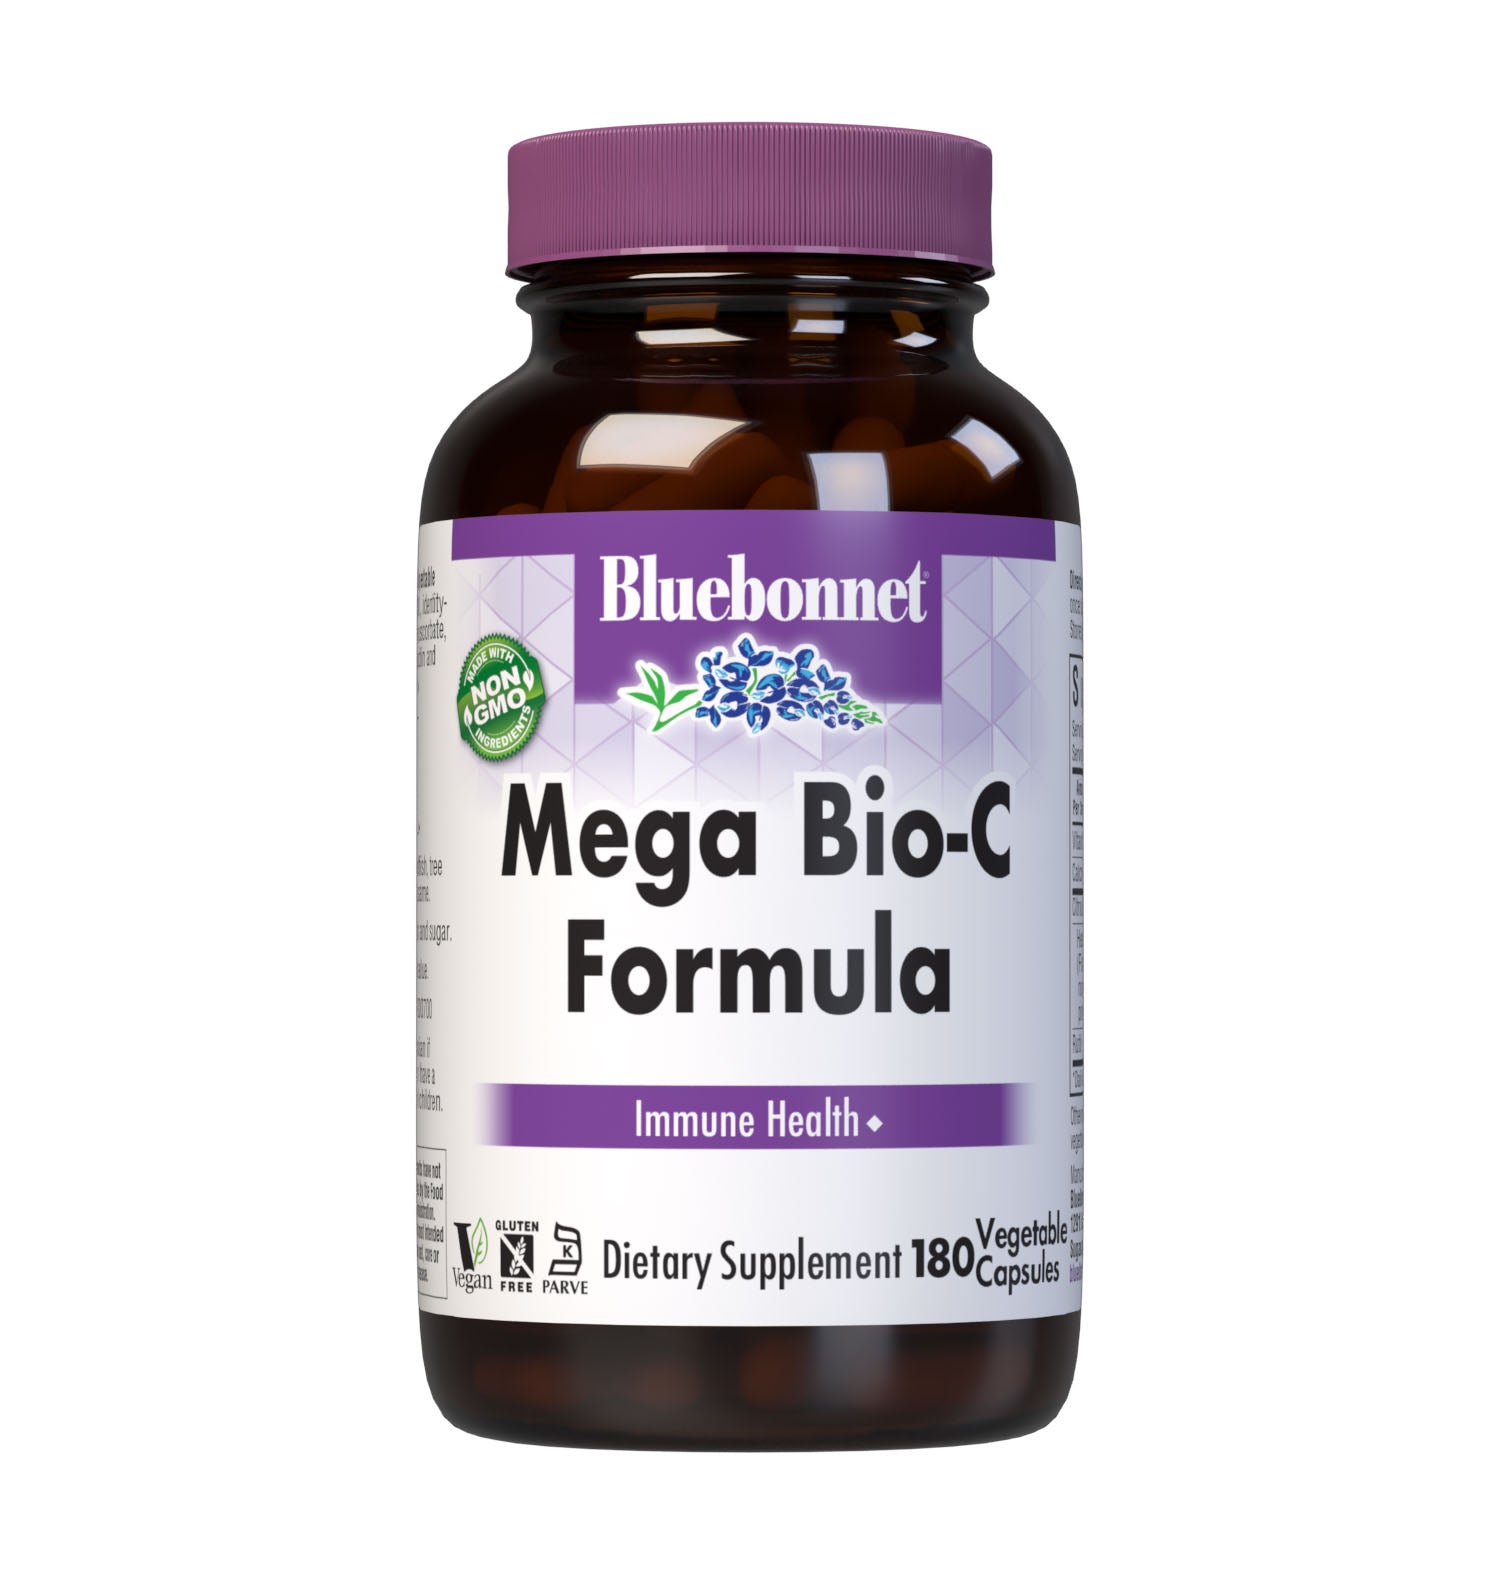 Bluebonnet’s Mega Bio-C Formula 180 Vegetable Capsules are formulated with high potency buffered vitamin C from calcium ascorbate and high potency citrus bioflavonoids complex from oranges, lemons, tangerines, grapefruits and limes plus, hesperidin and rutin for immune health. #size_180 count